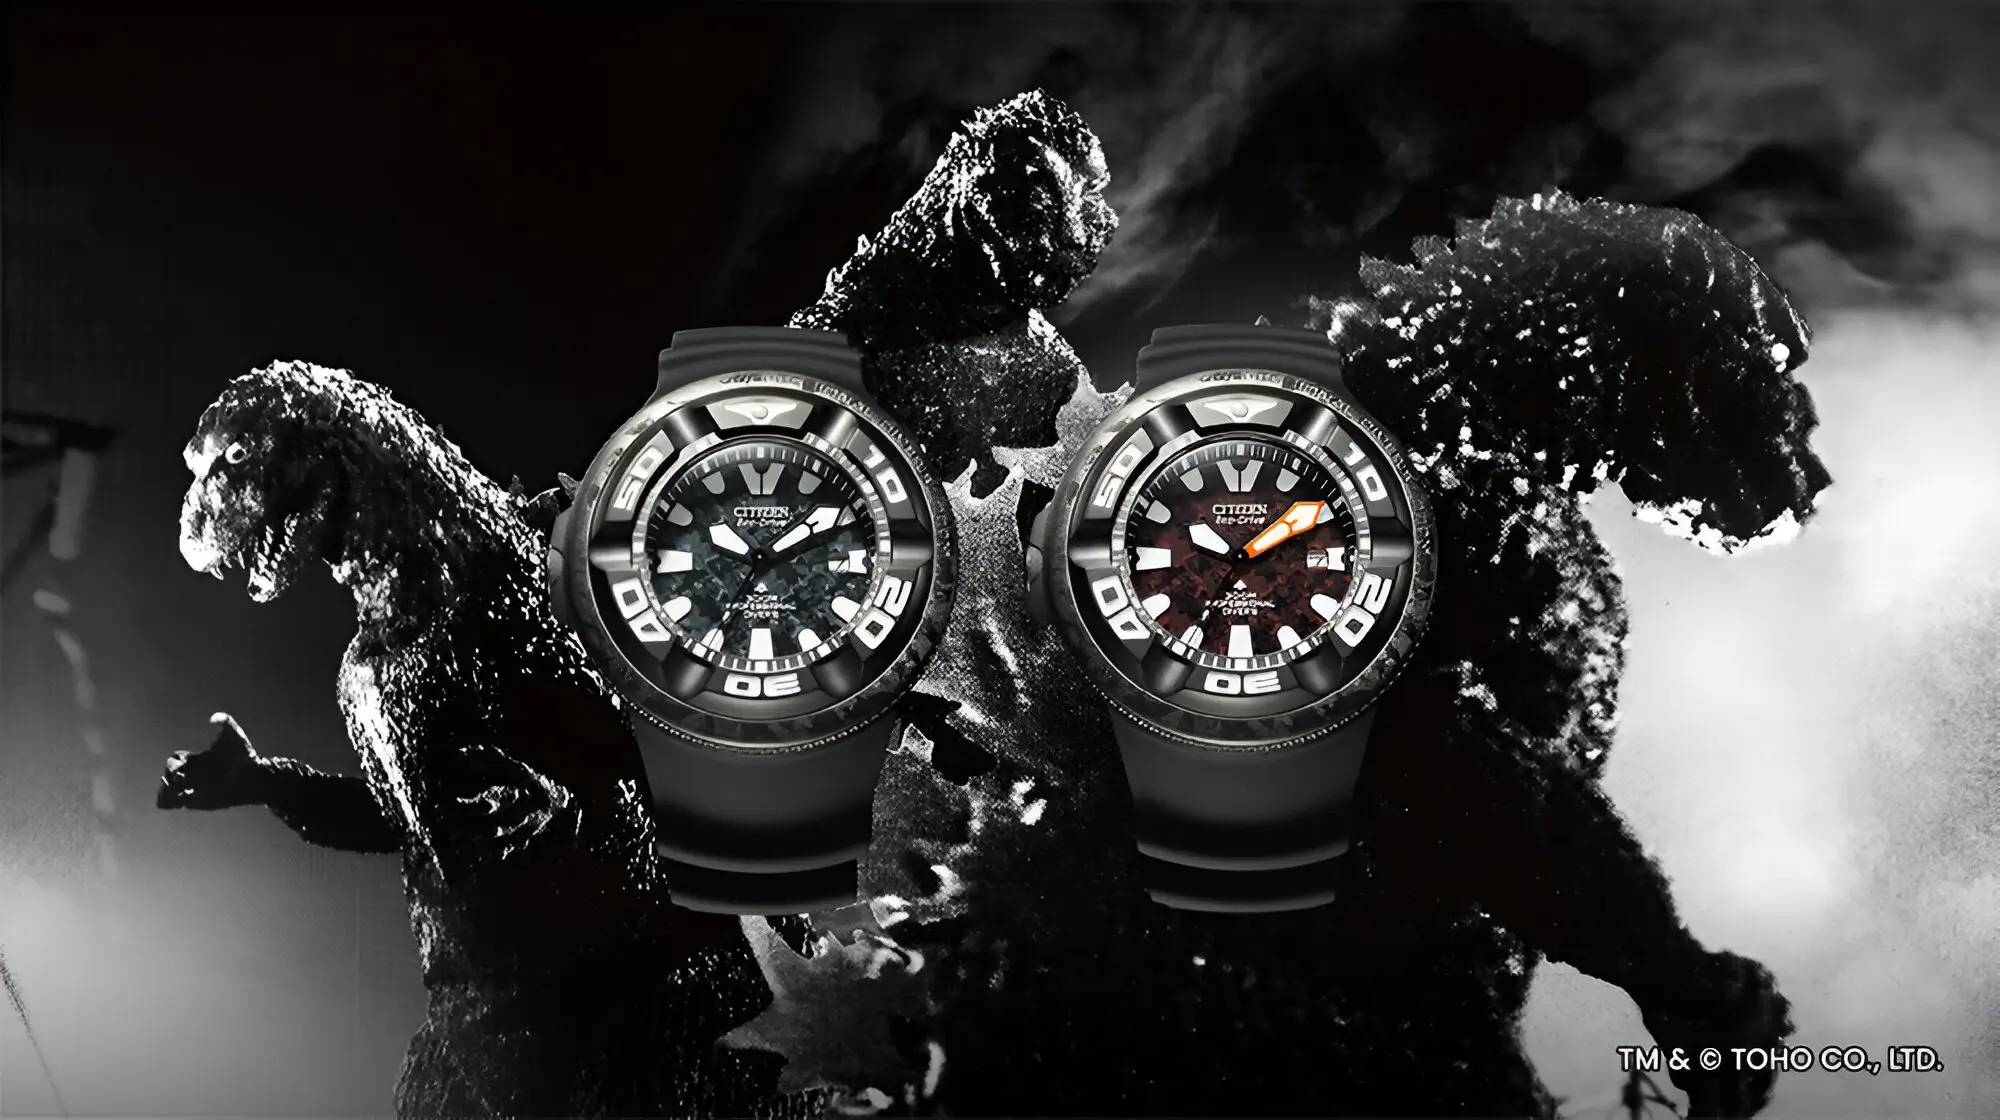 Citizen Promaster Diver – Which of the 2 new model is best?